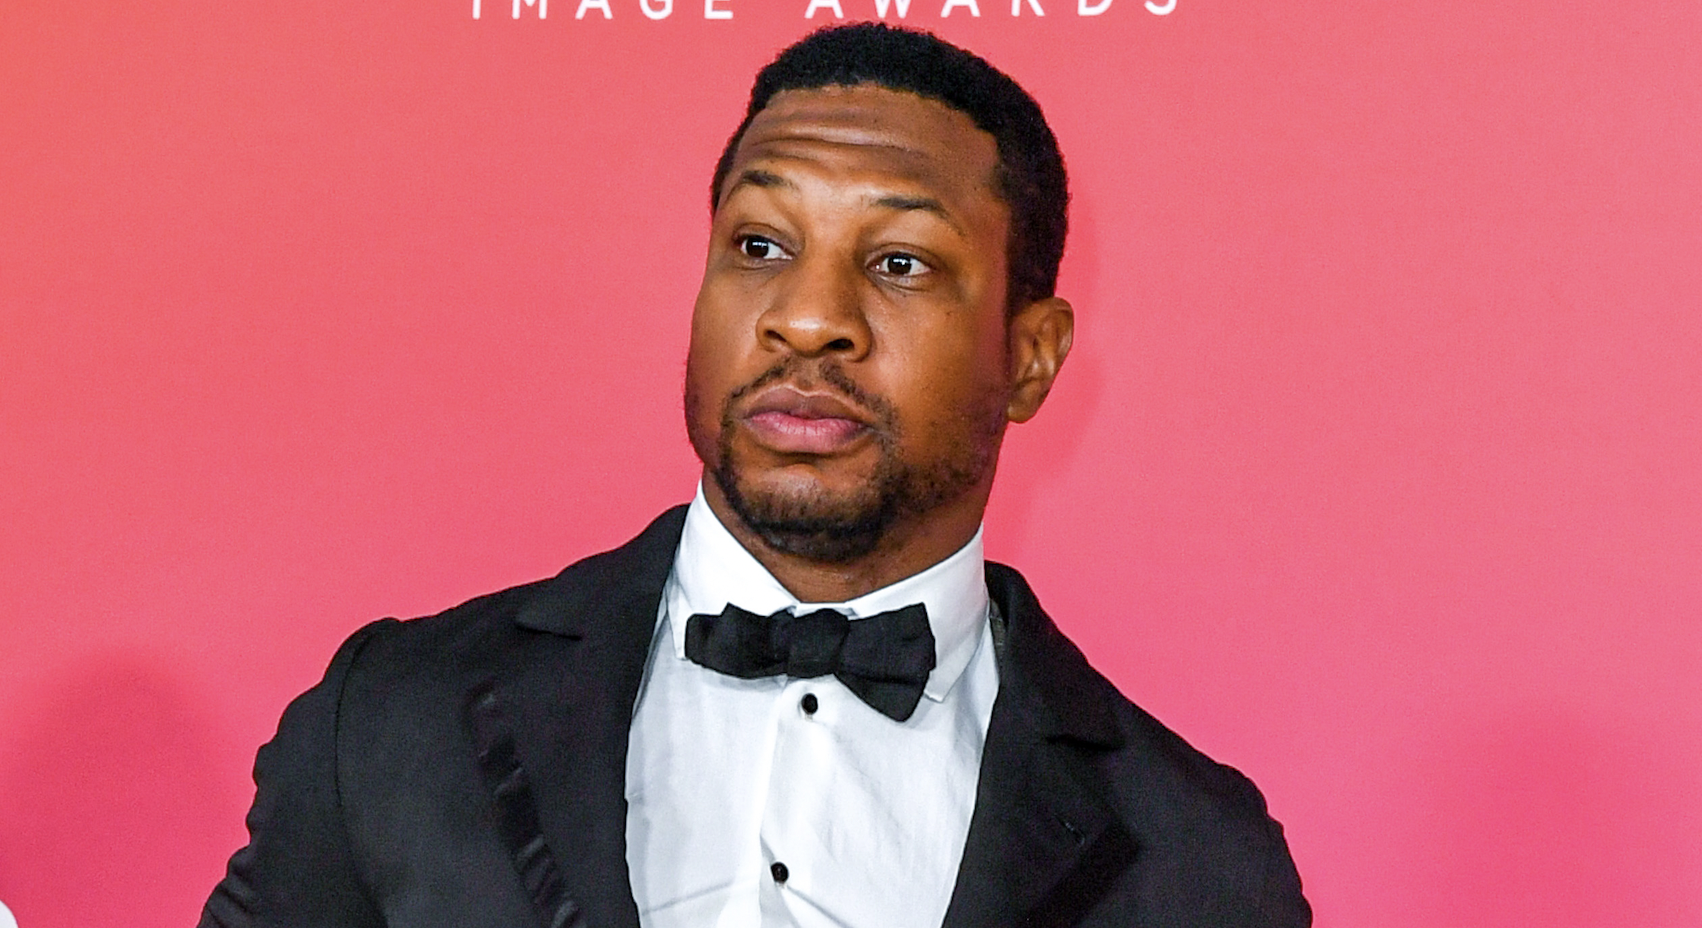 U.S. Army Pauses Advertising Campaign Following Jonathan Majors Arrest